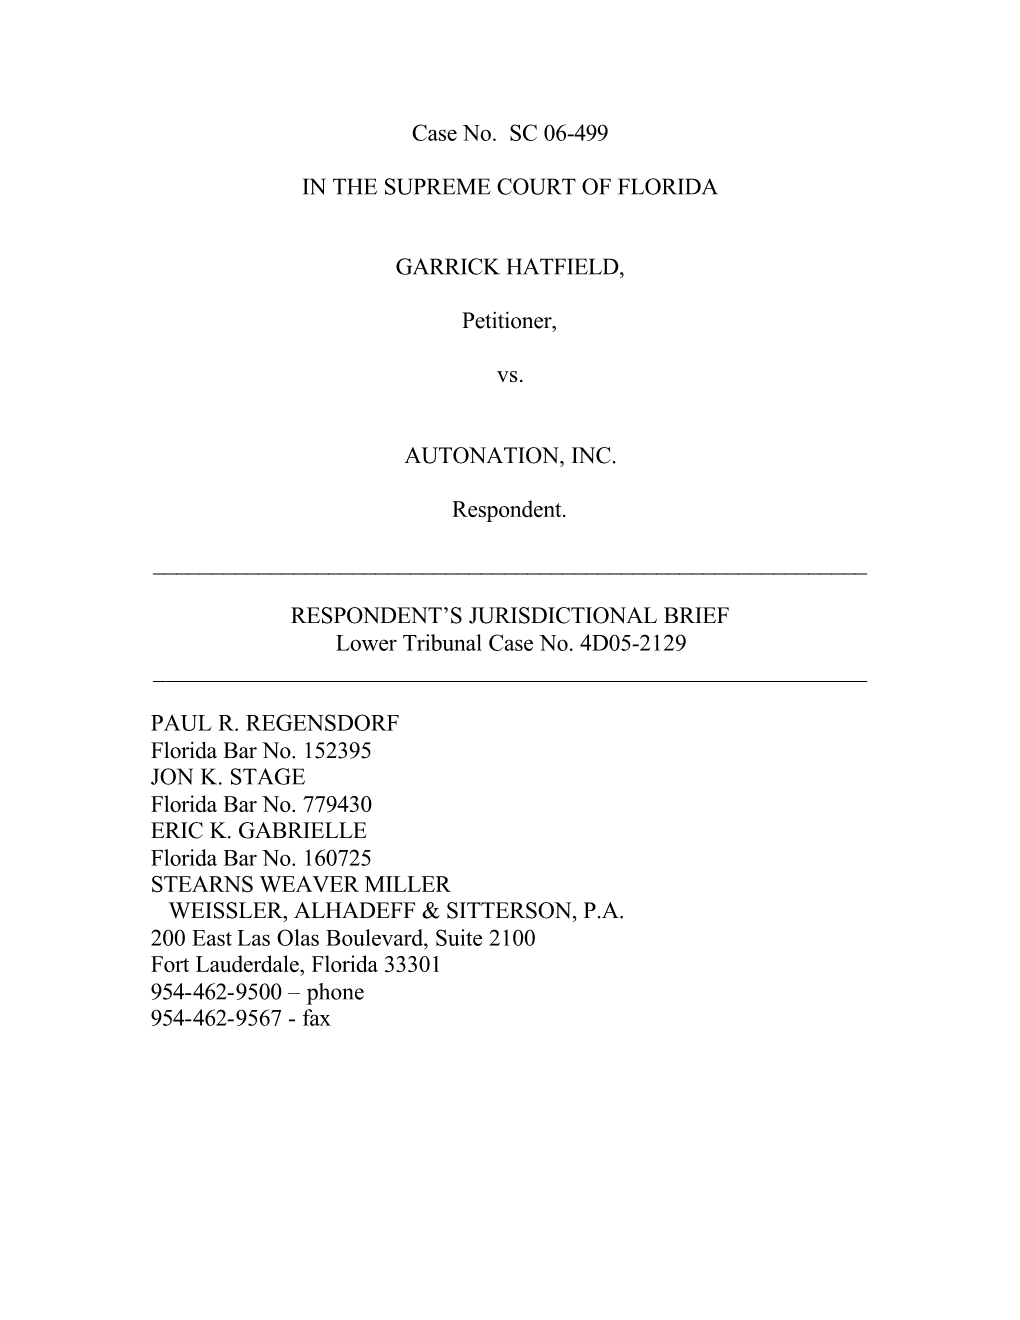 Case No. SC 06-499 in the SUPREME COURT of FLORIDA